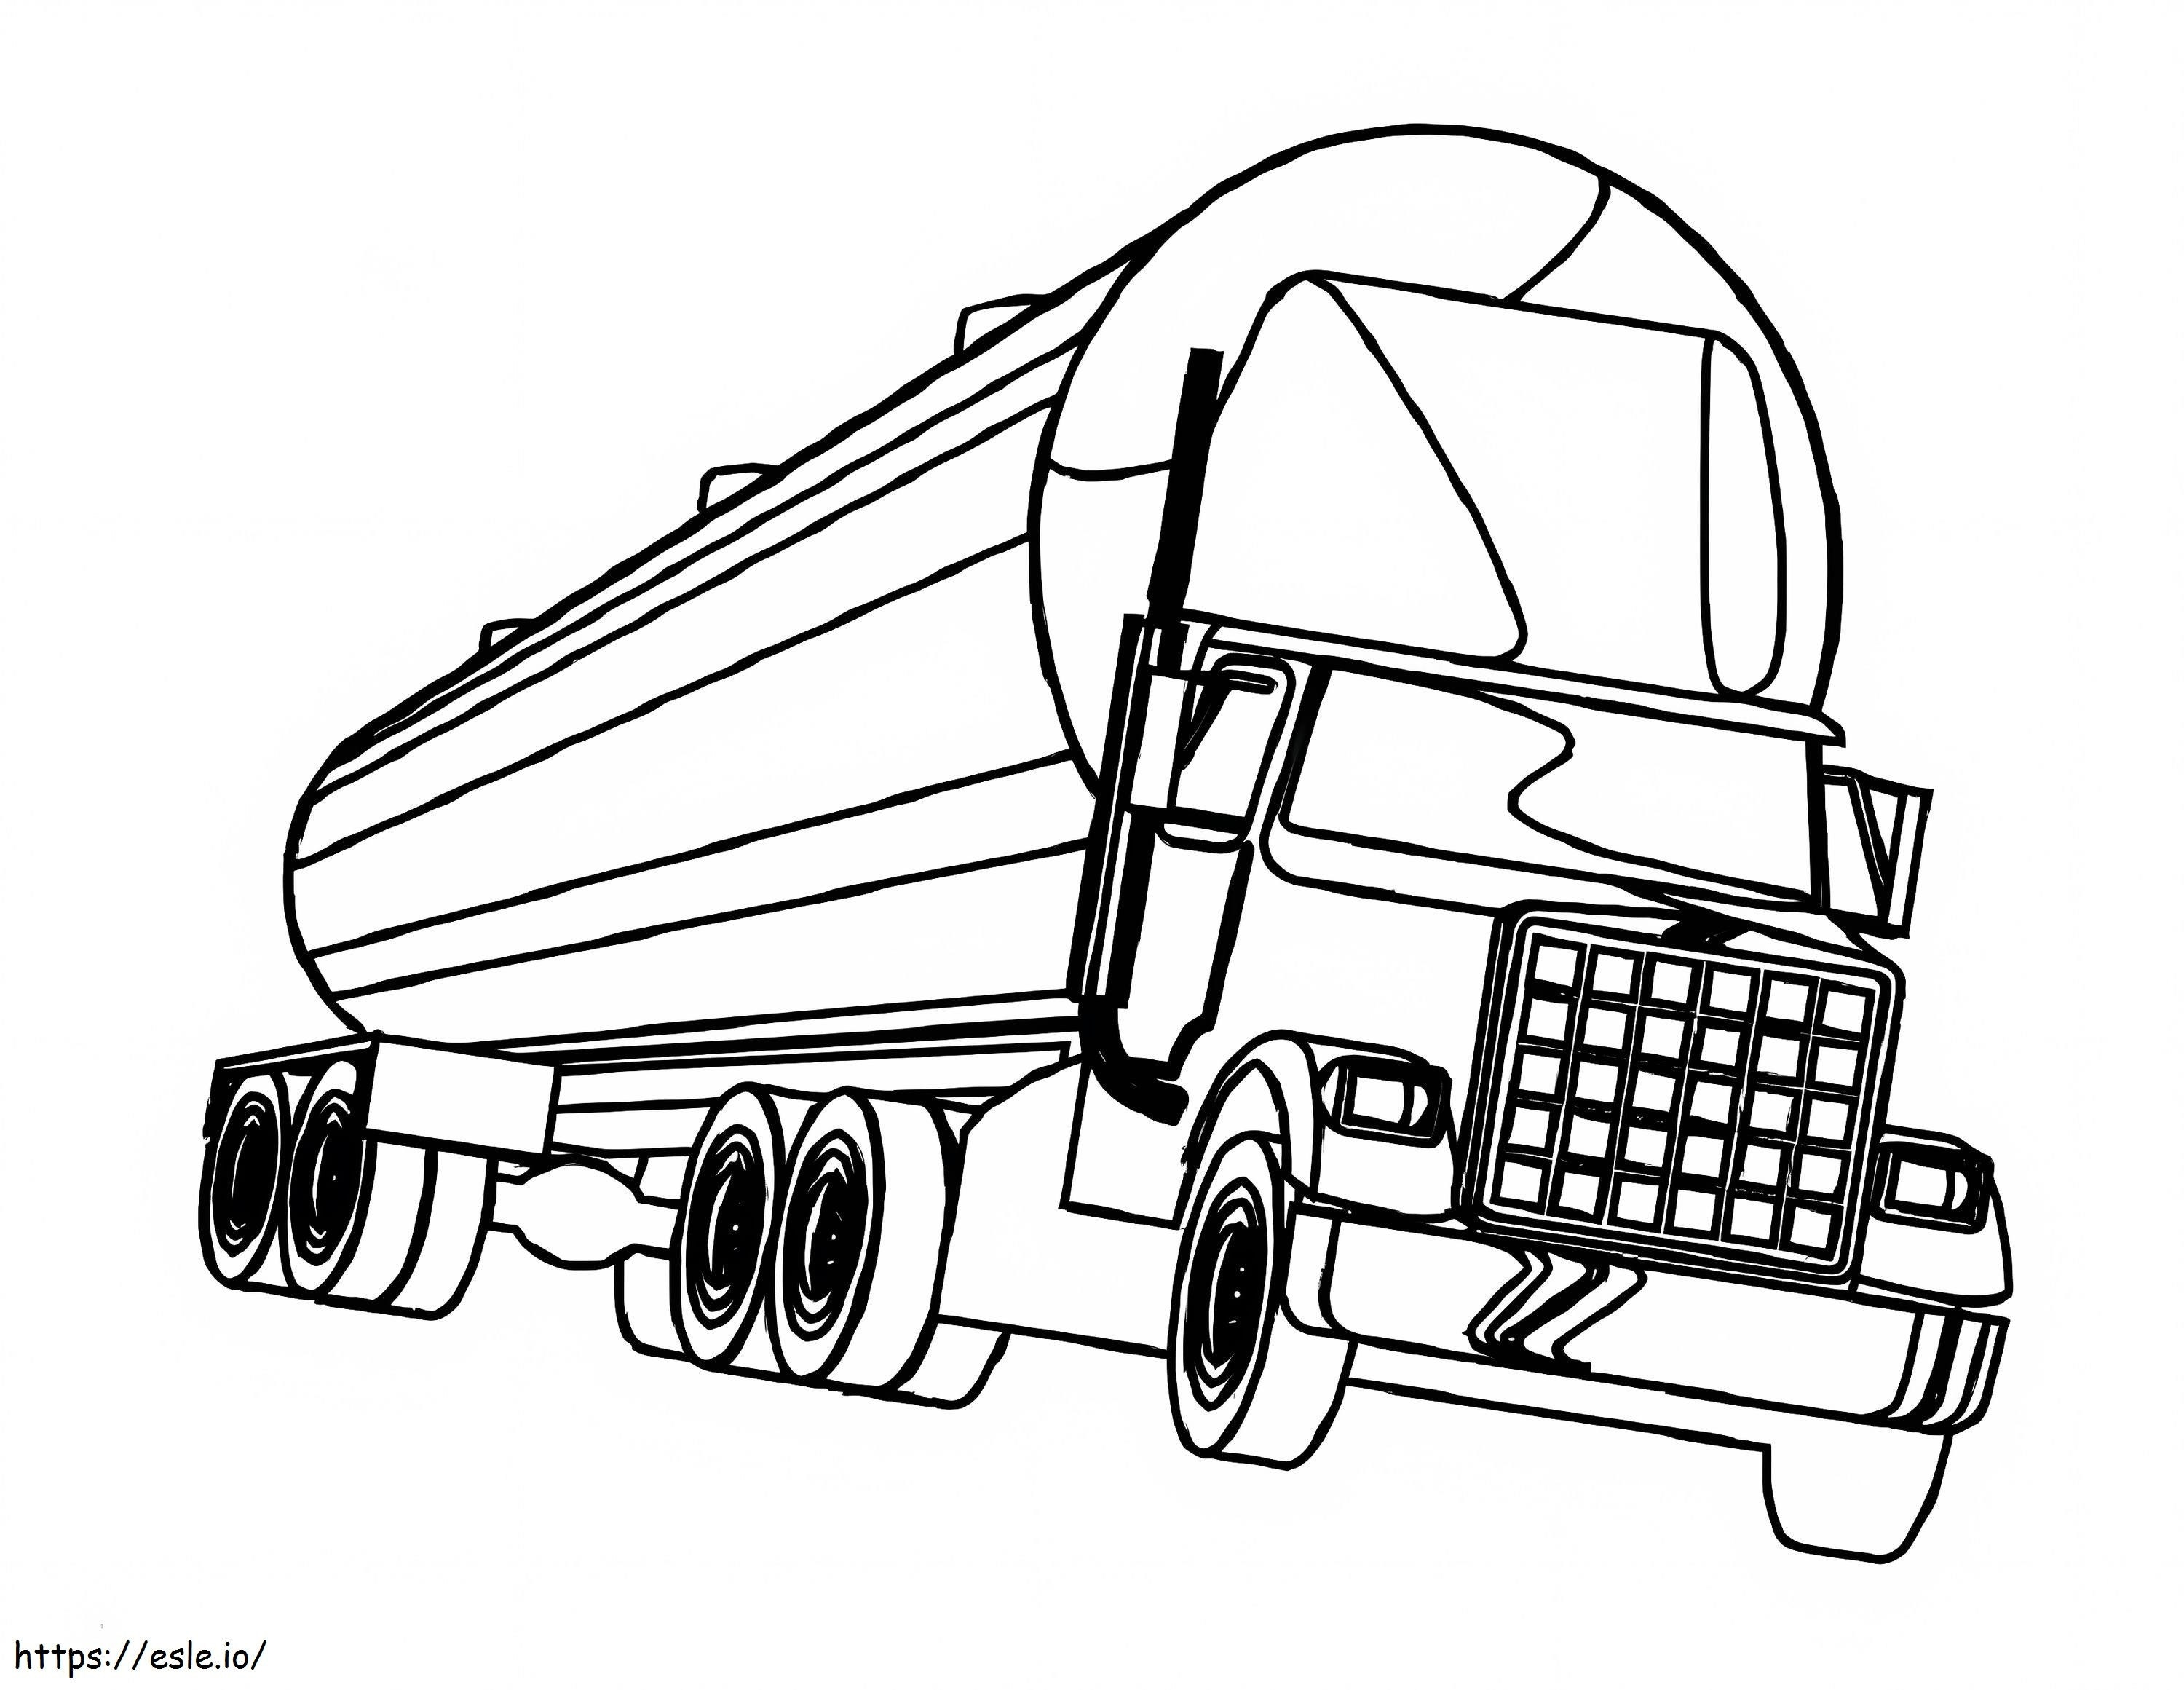 Normal Truck coloring page